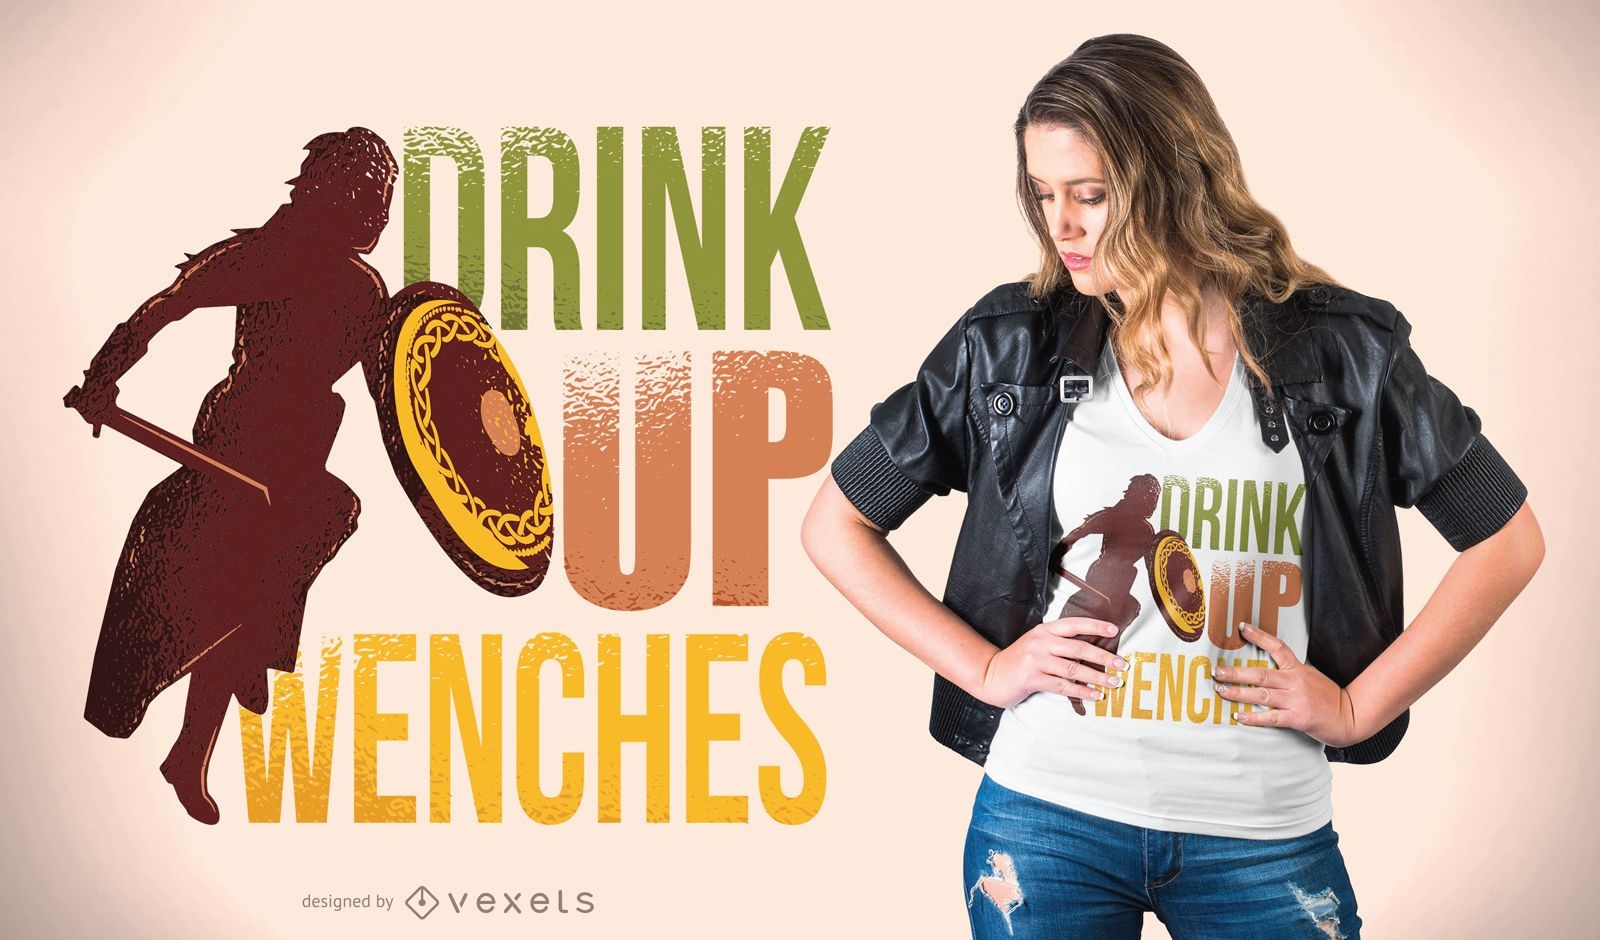 Drink up wenches t-shirt design